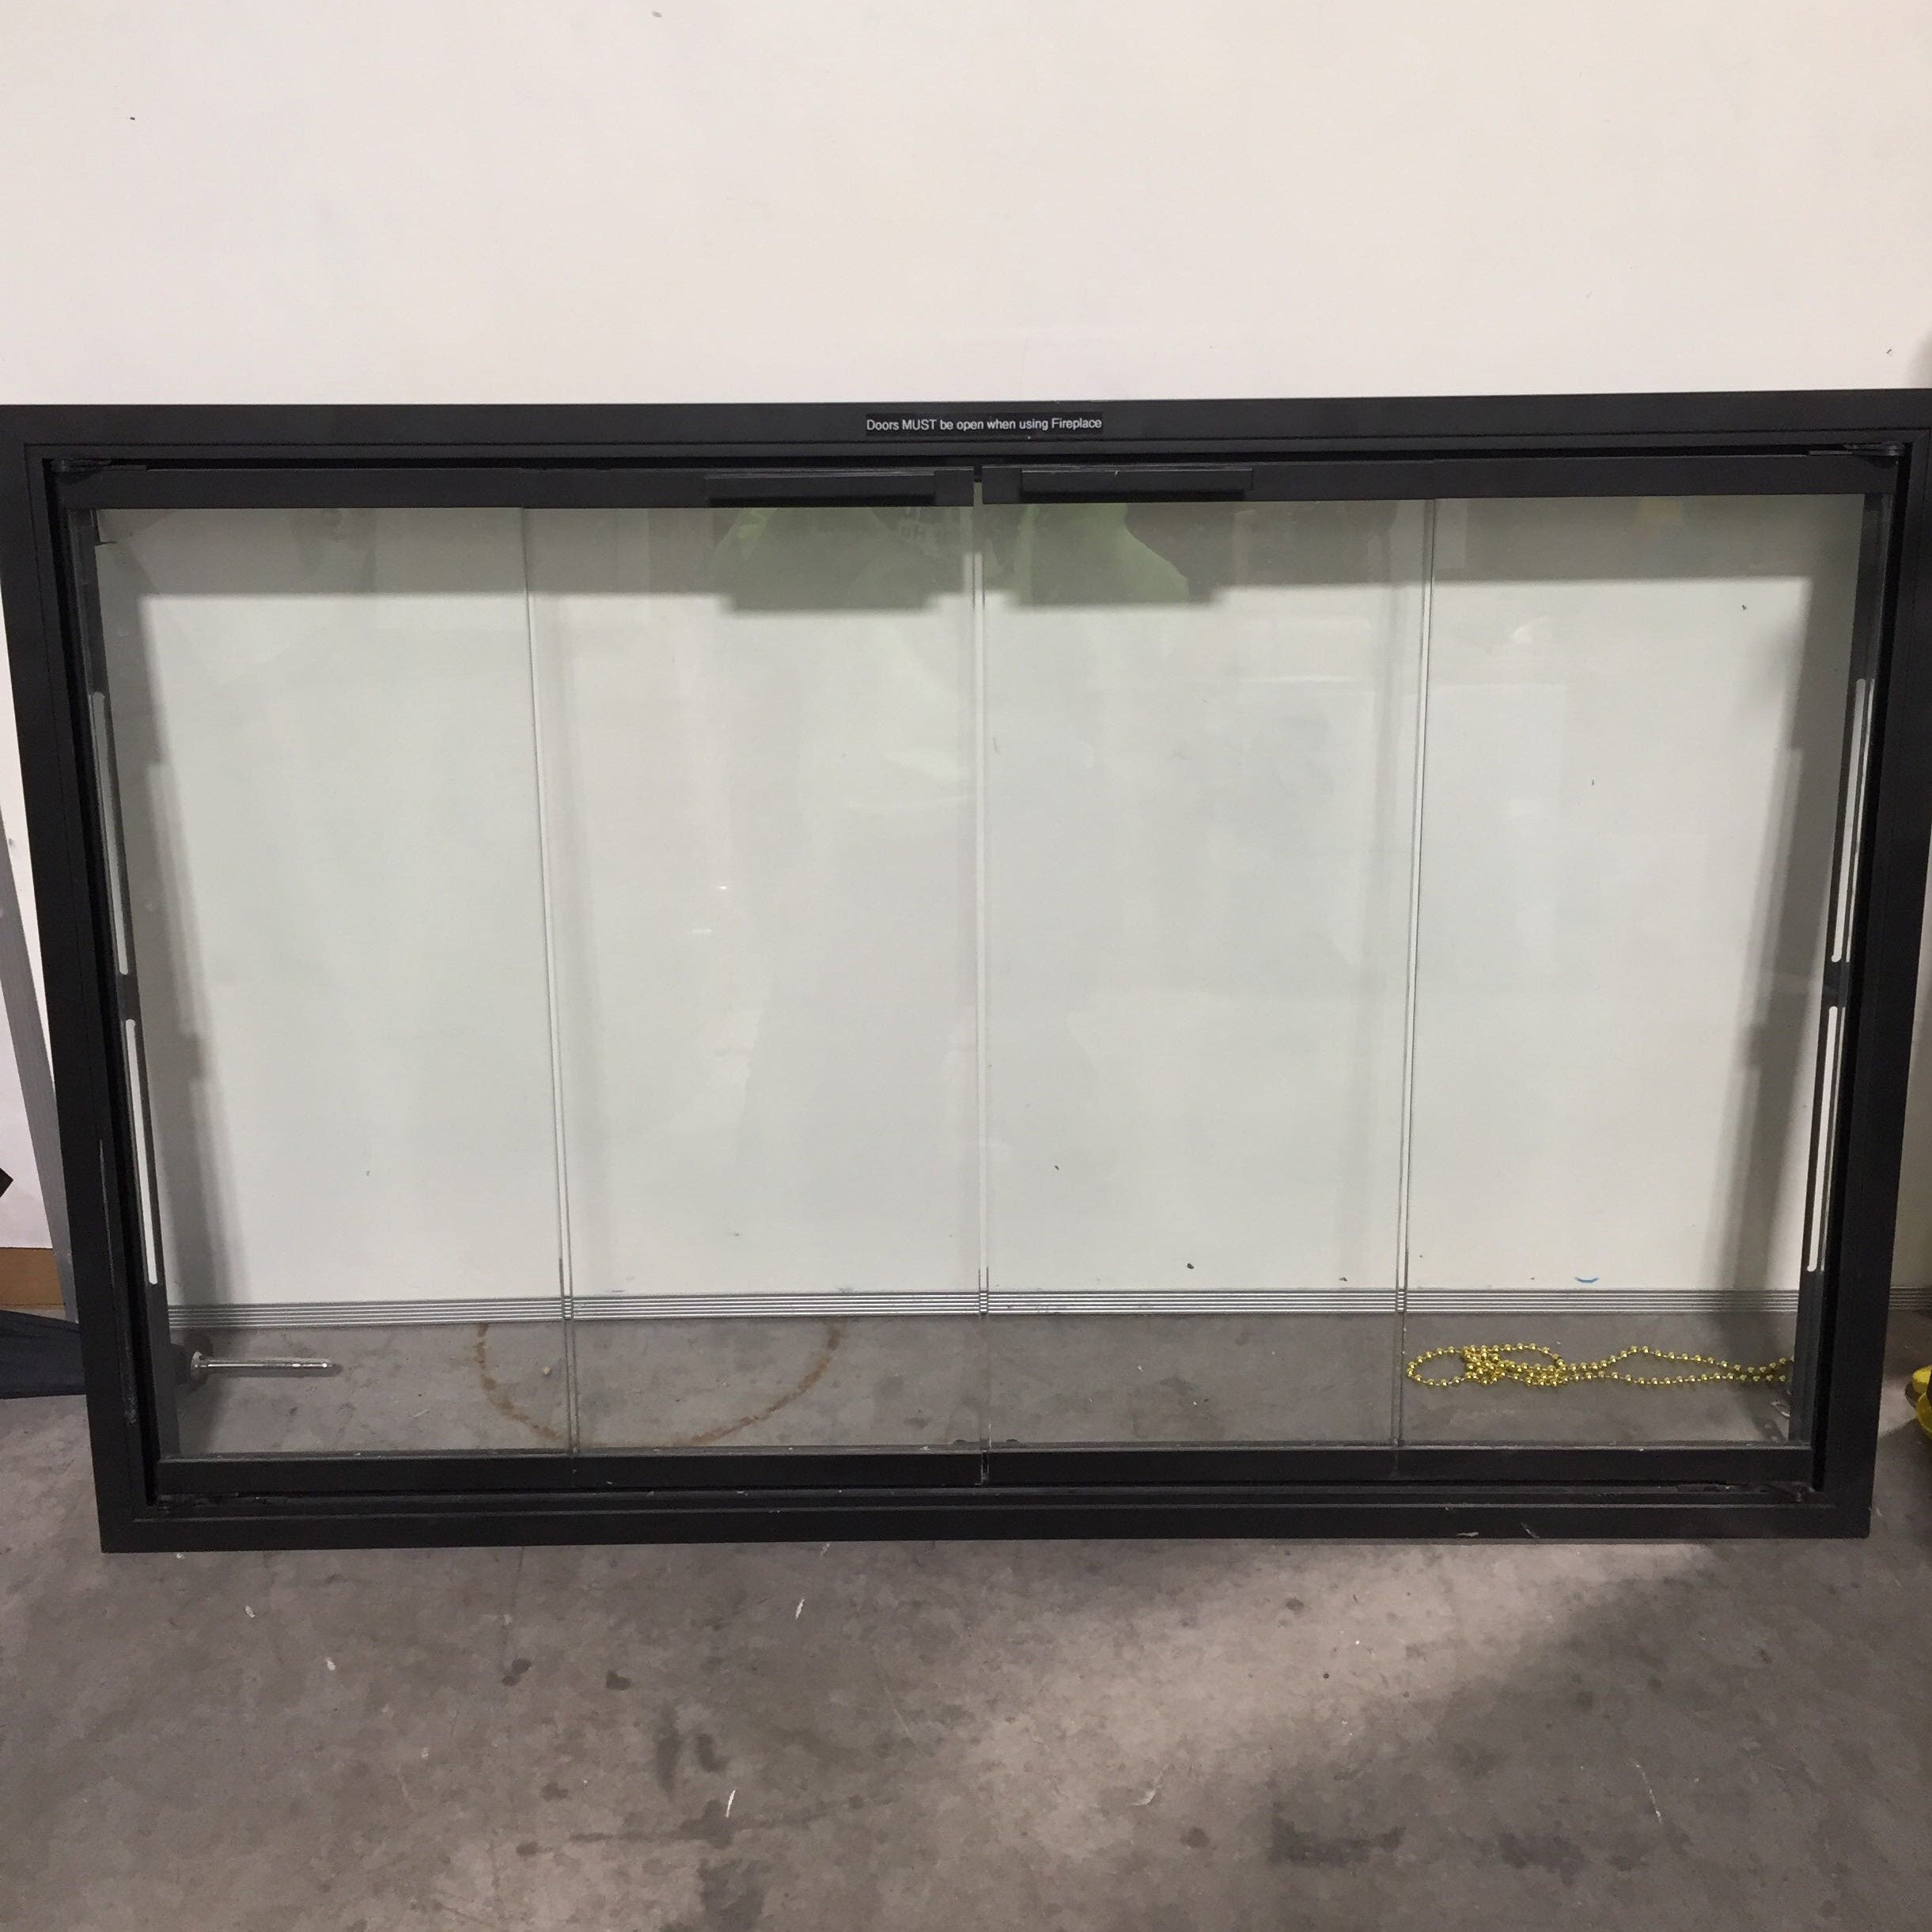 39"x 1.5"x 25" Metal and Glass Fireplace Screen